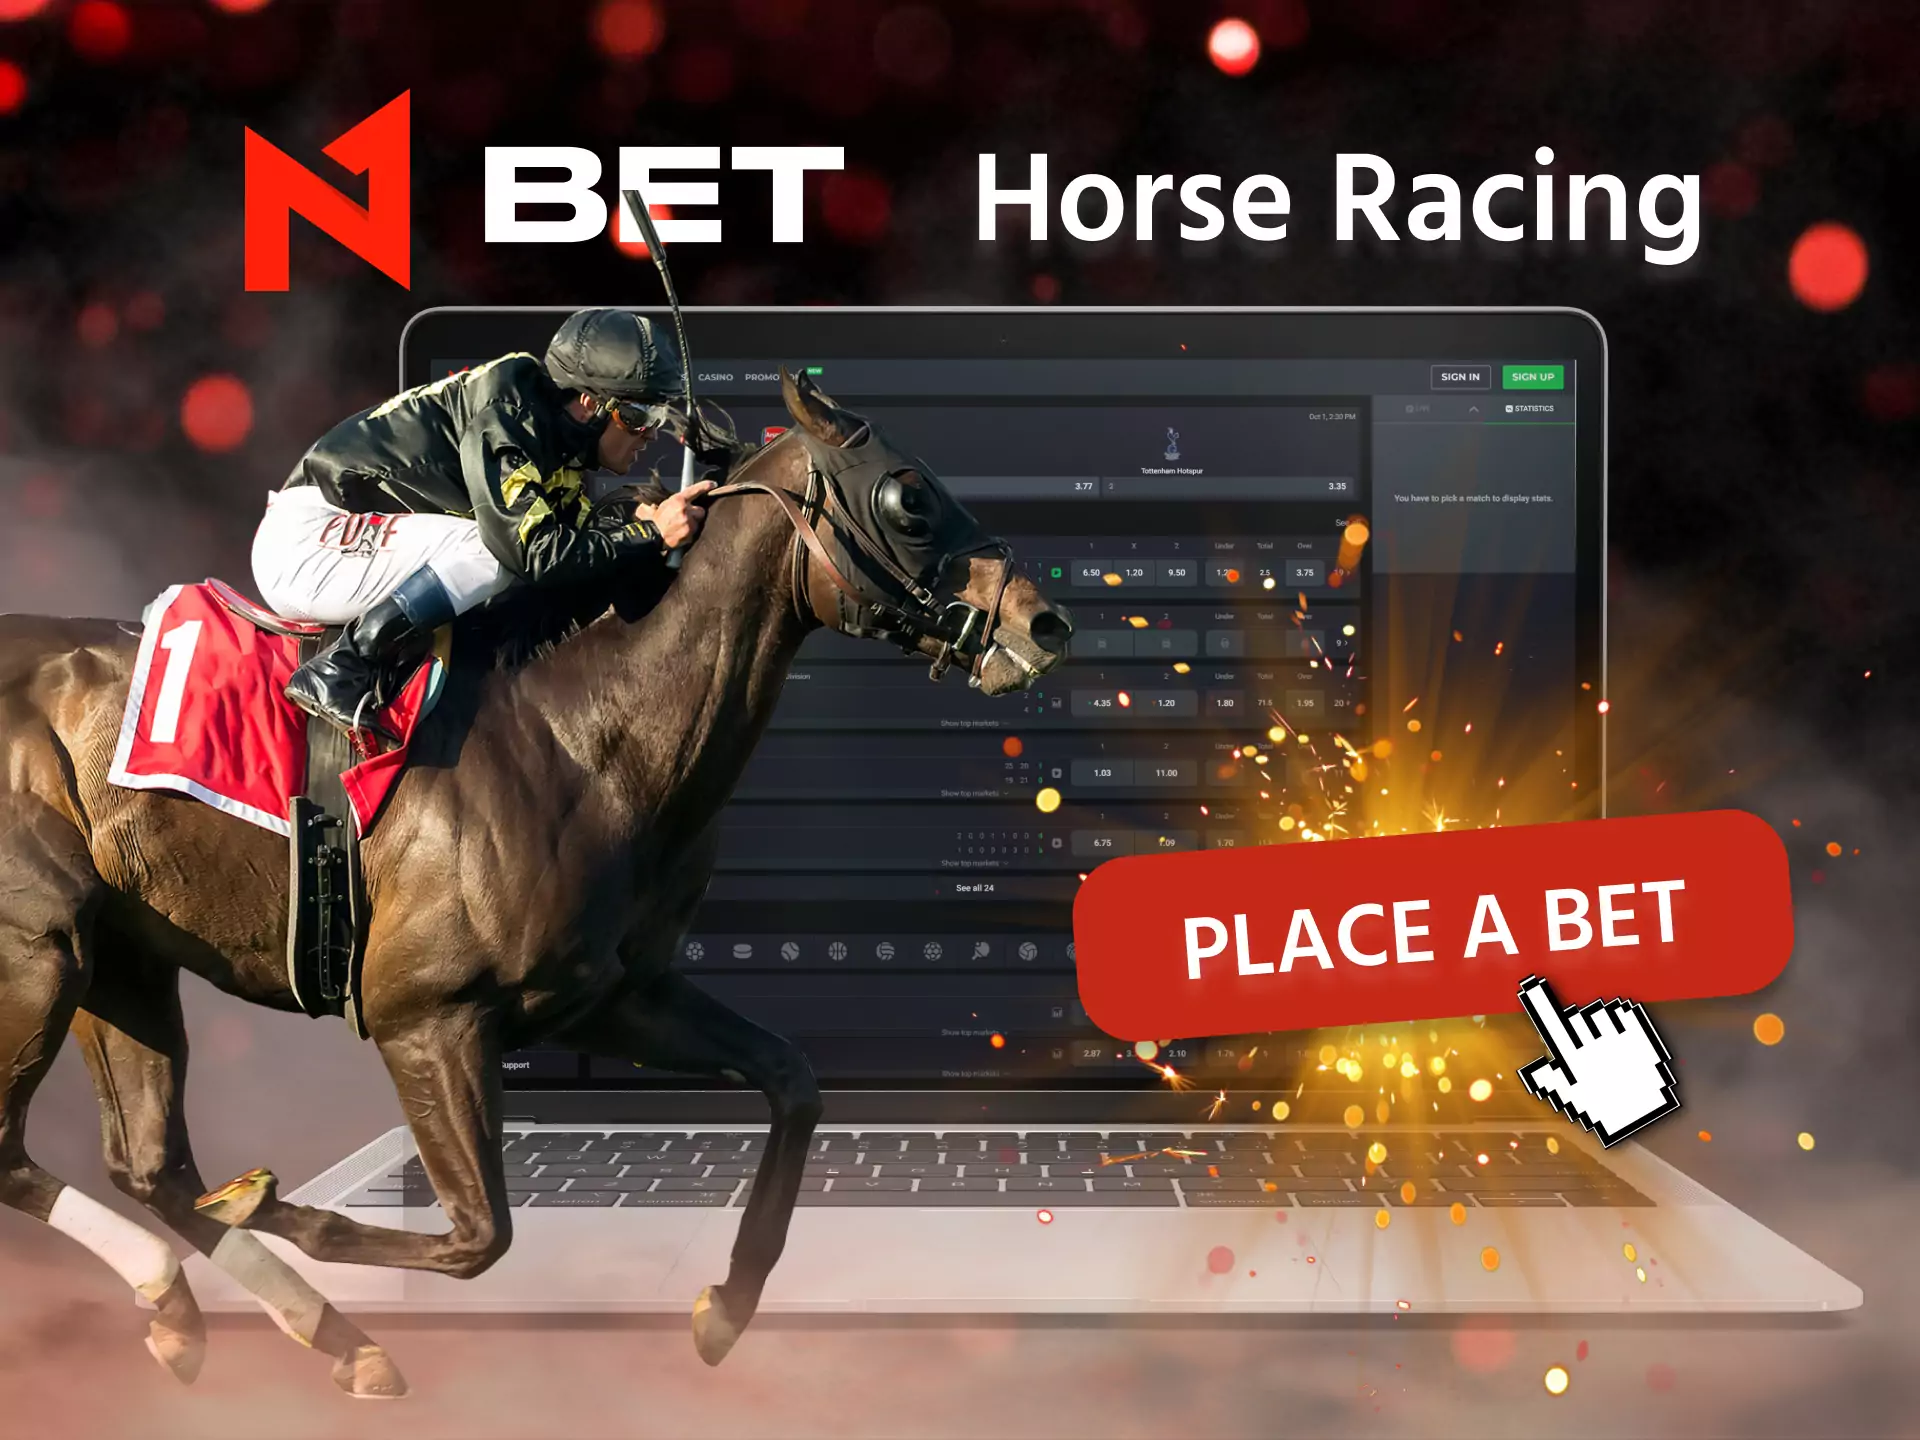 Place bets on horse racing in N1Bet.